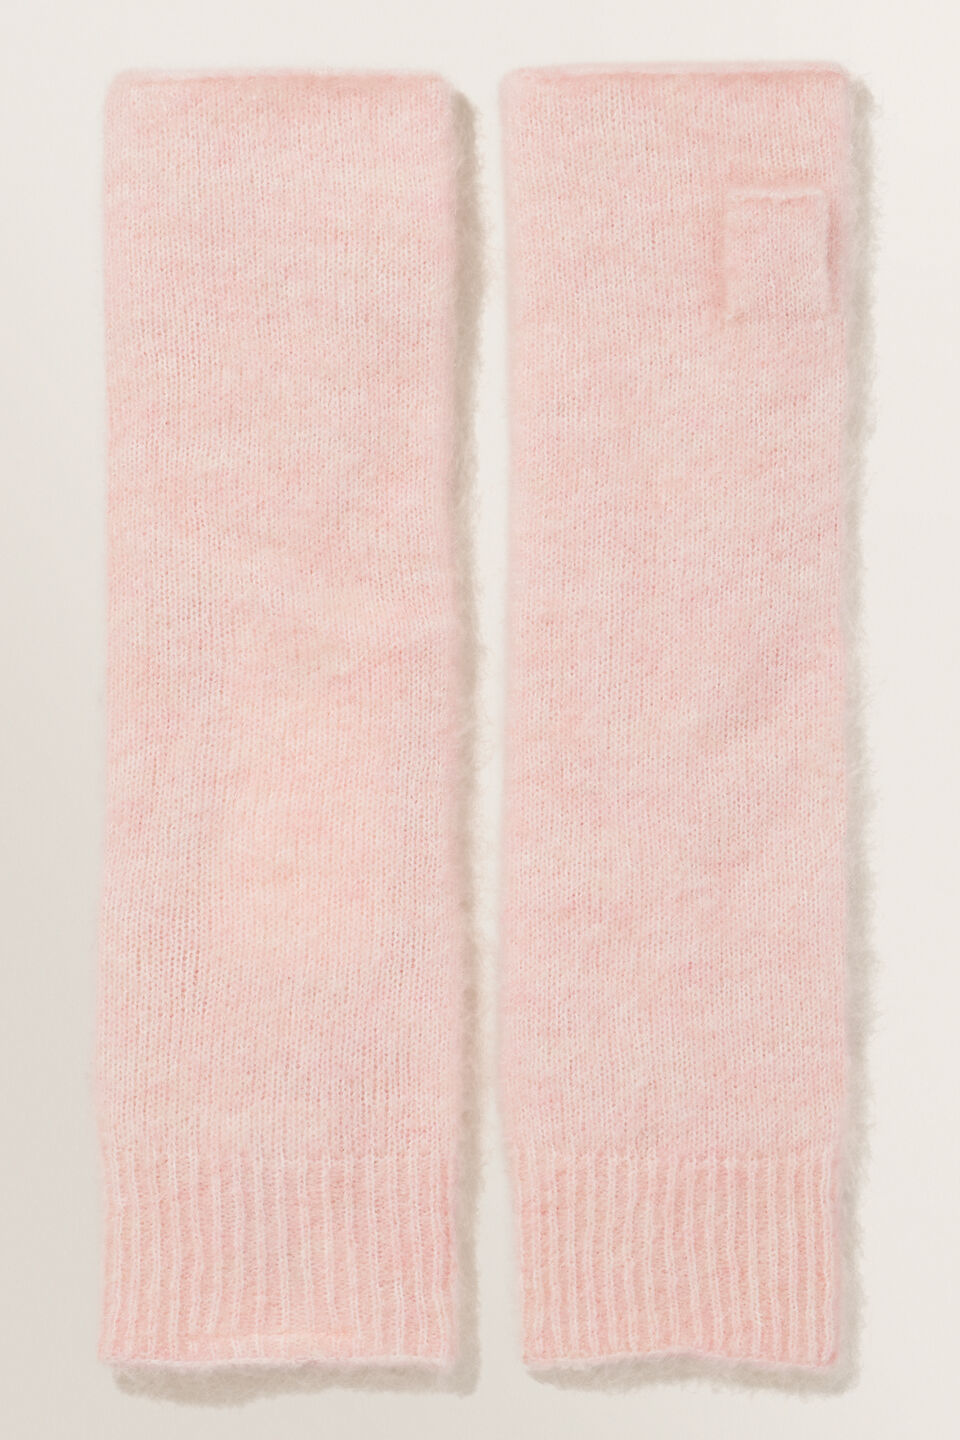 Mohair Arm Warmers  Ash Pink